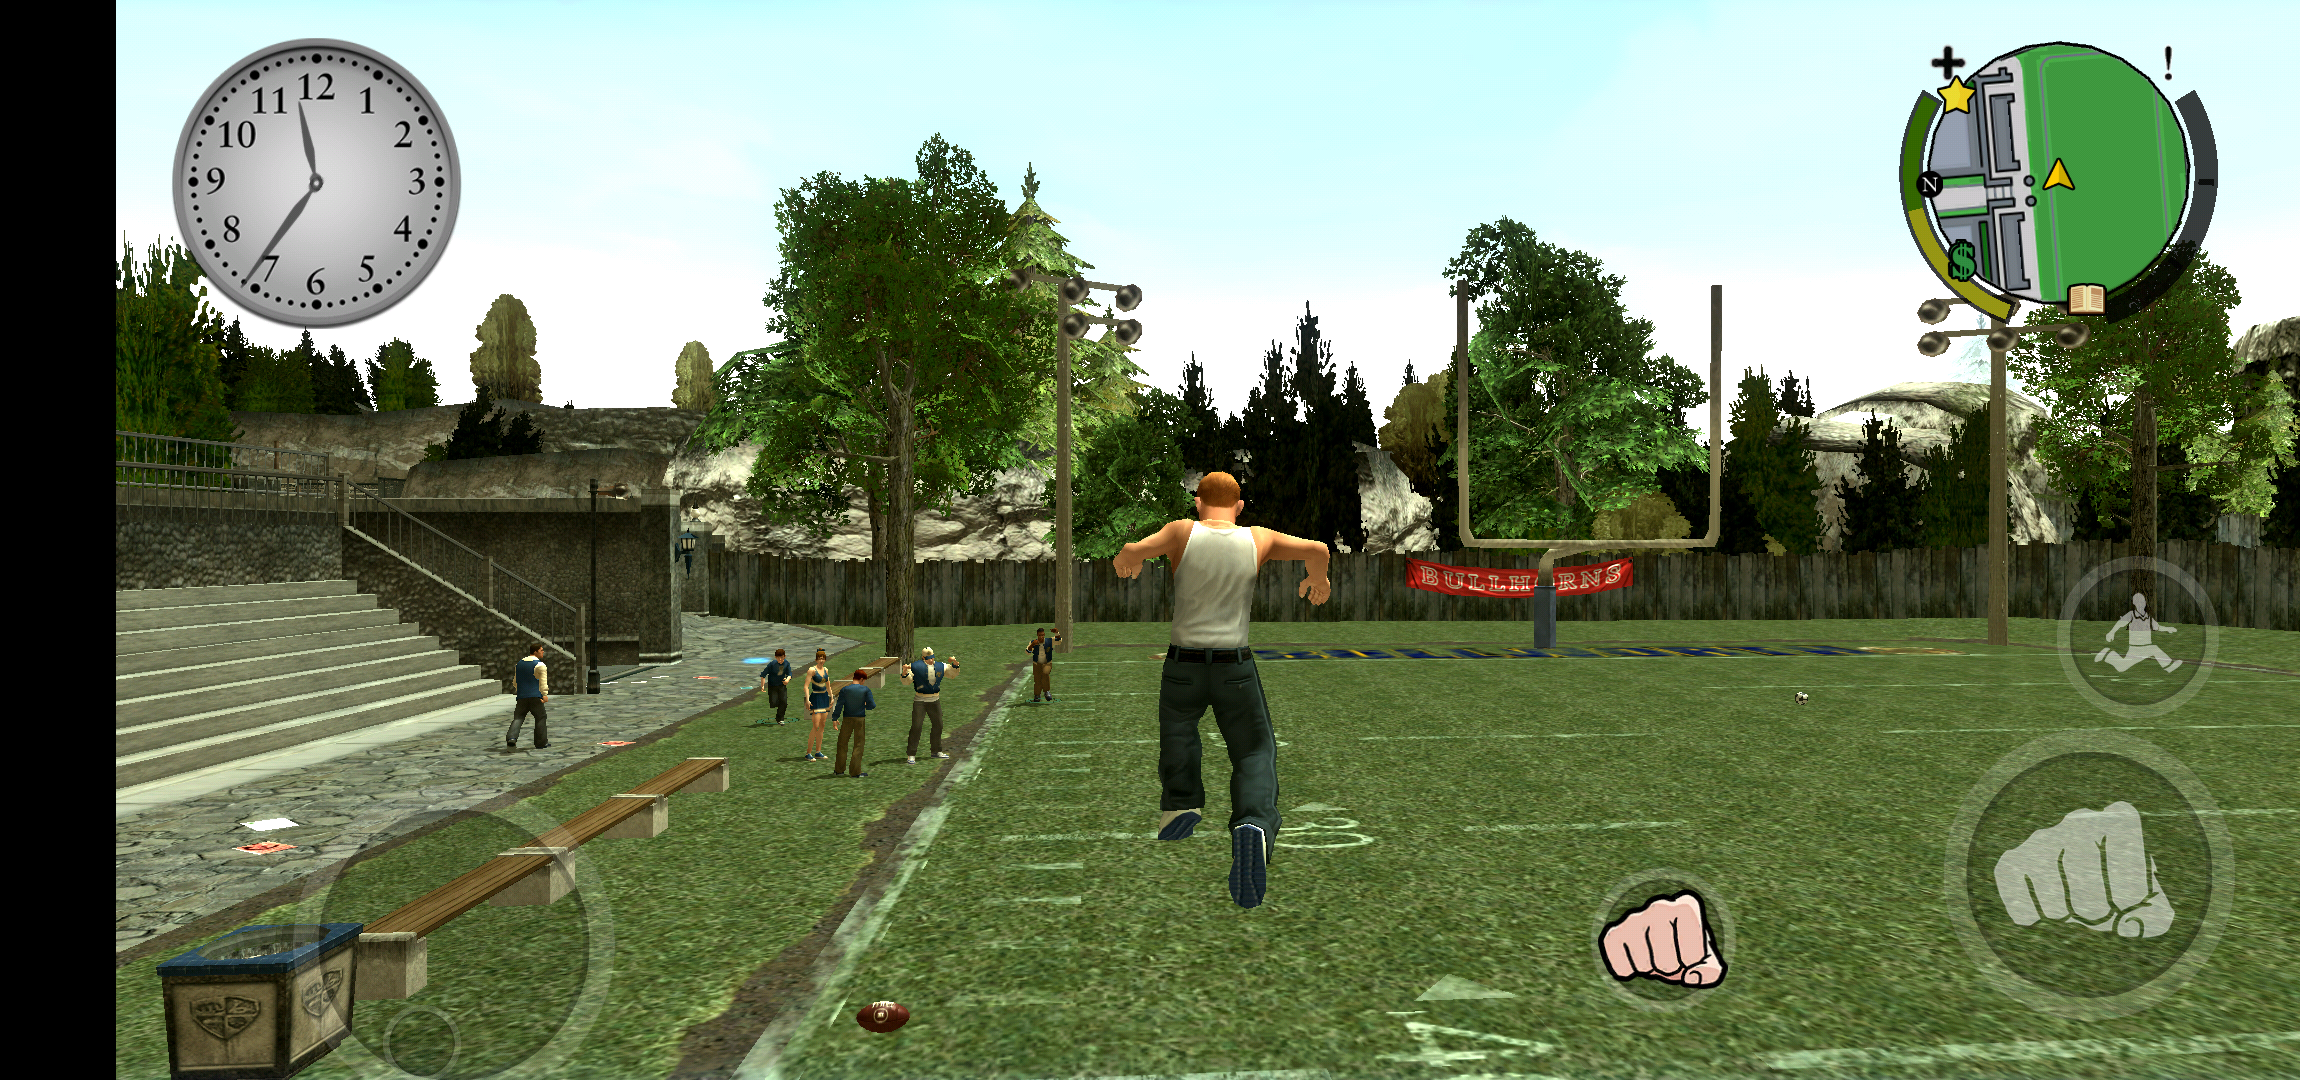 how to download bully anniversary edition for free in 2023 